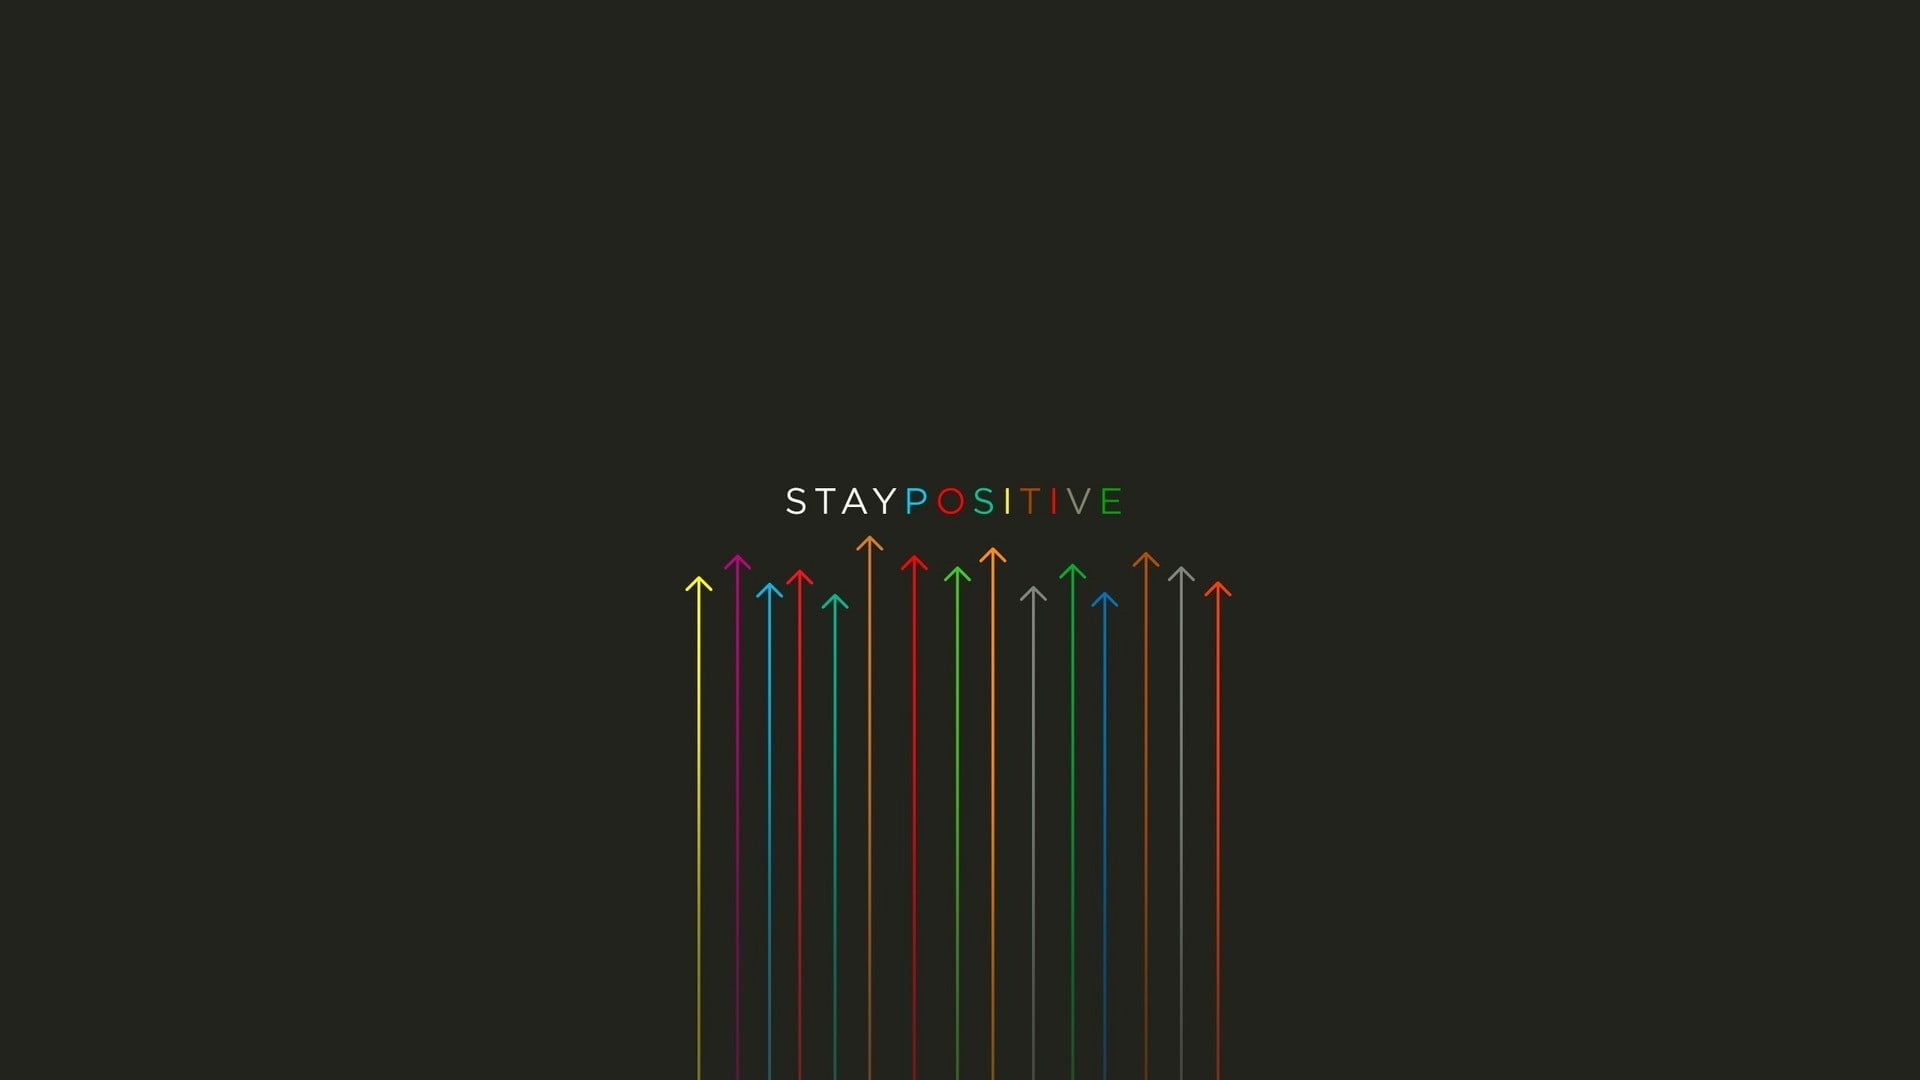 black background with stay positive text overlay, simple, minimalism, digital art, motivational